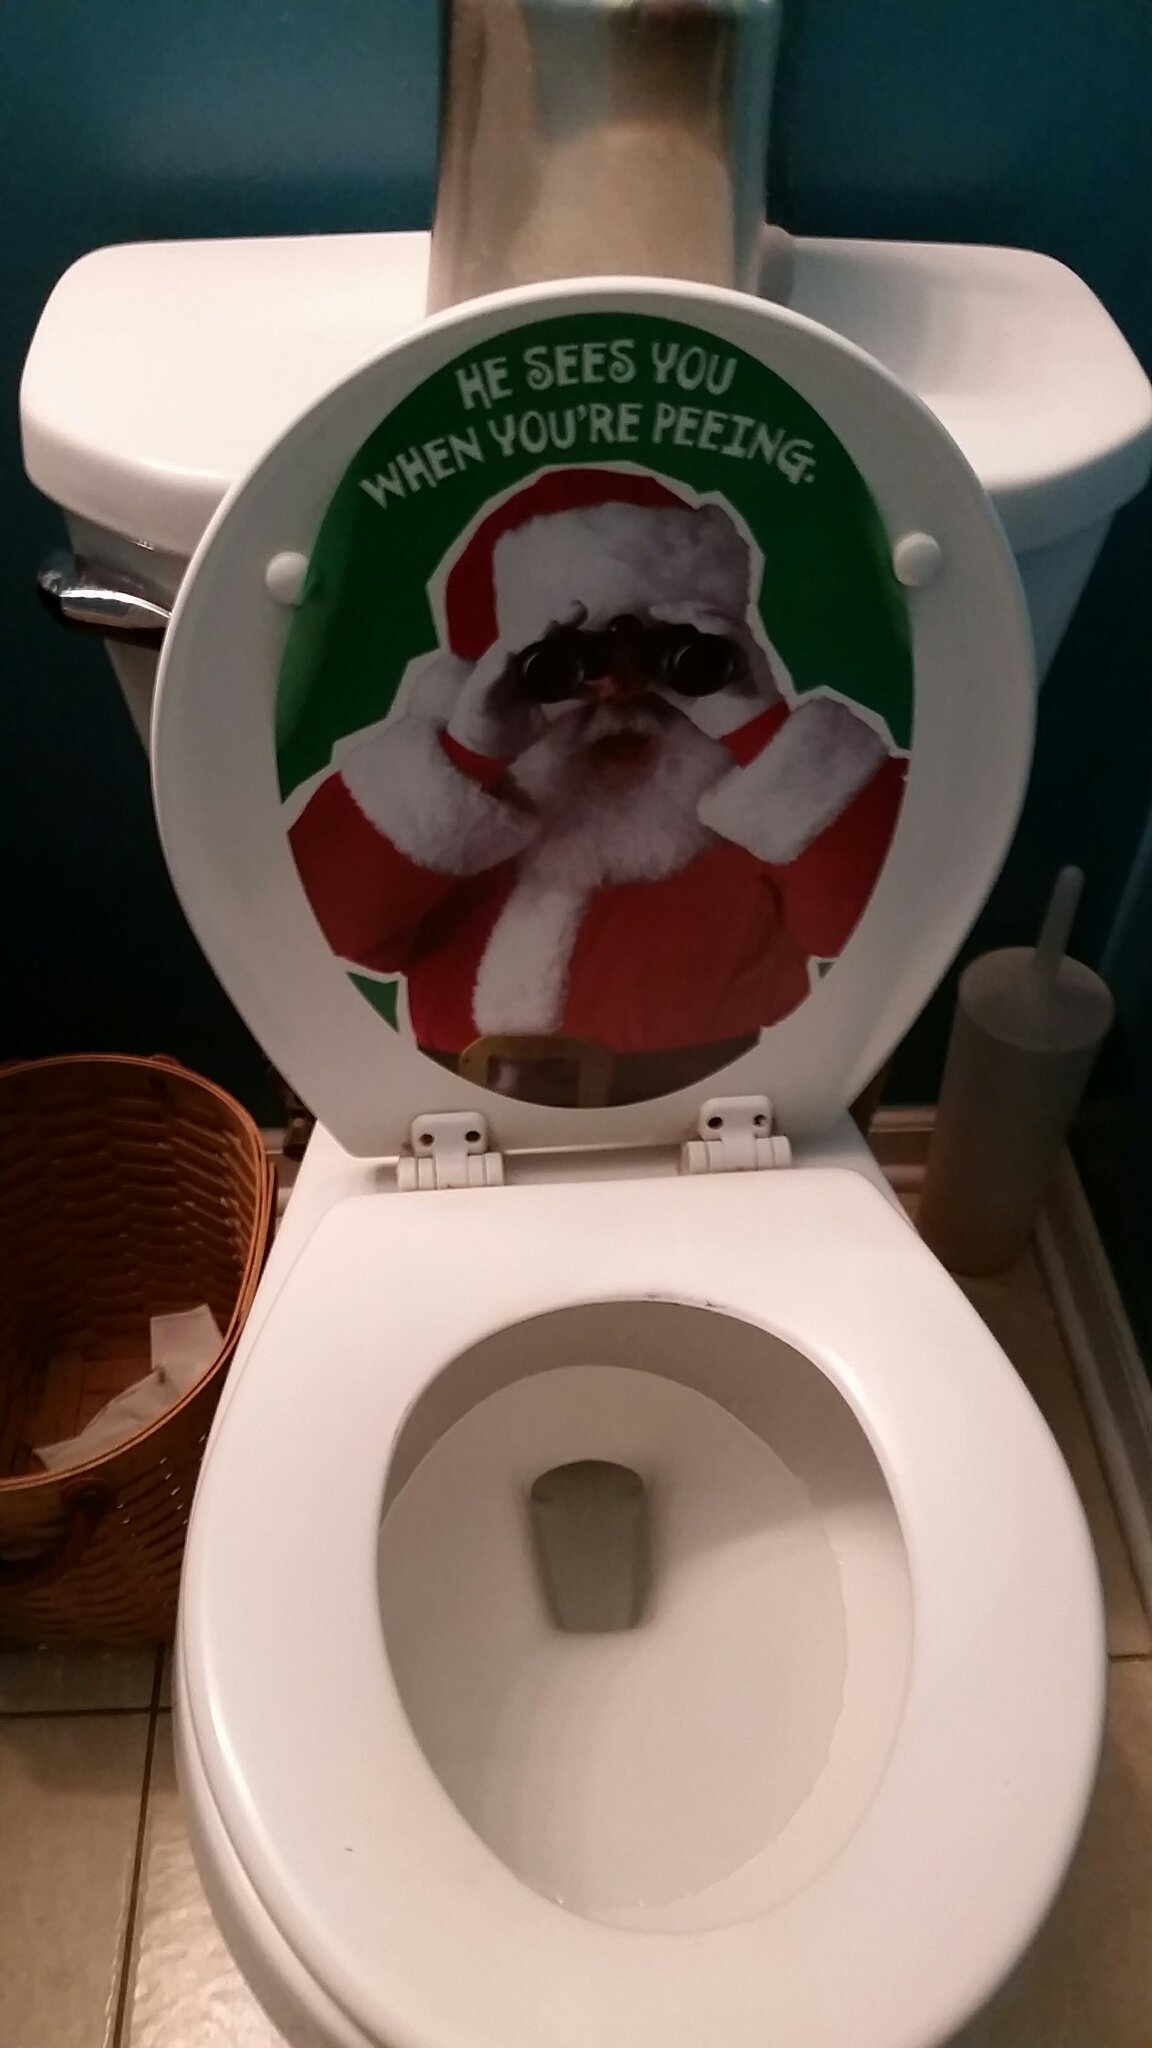 Cousin likes to decorate early.... had a heart attack when I turned on the bathroom light - meme